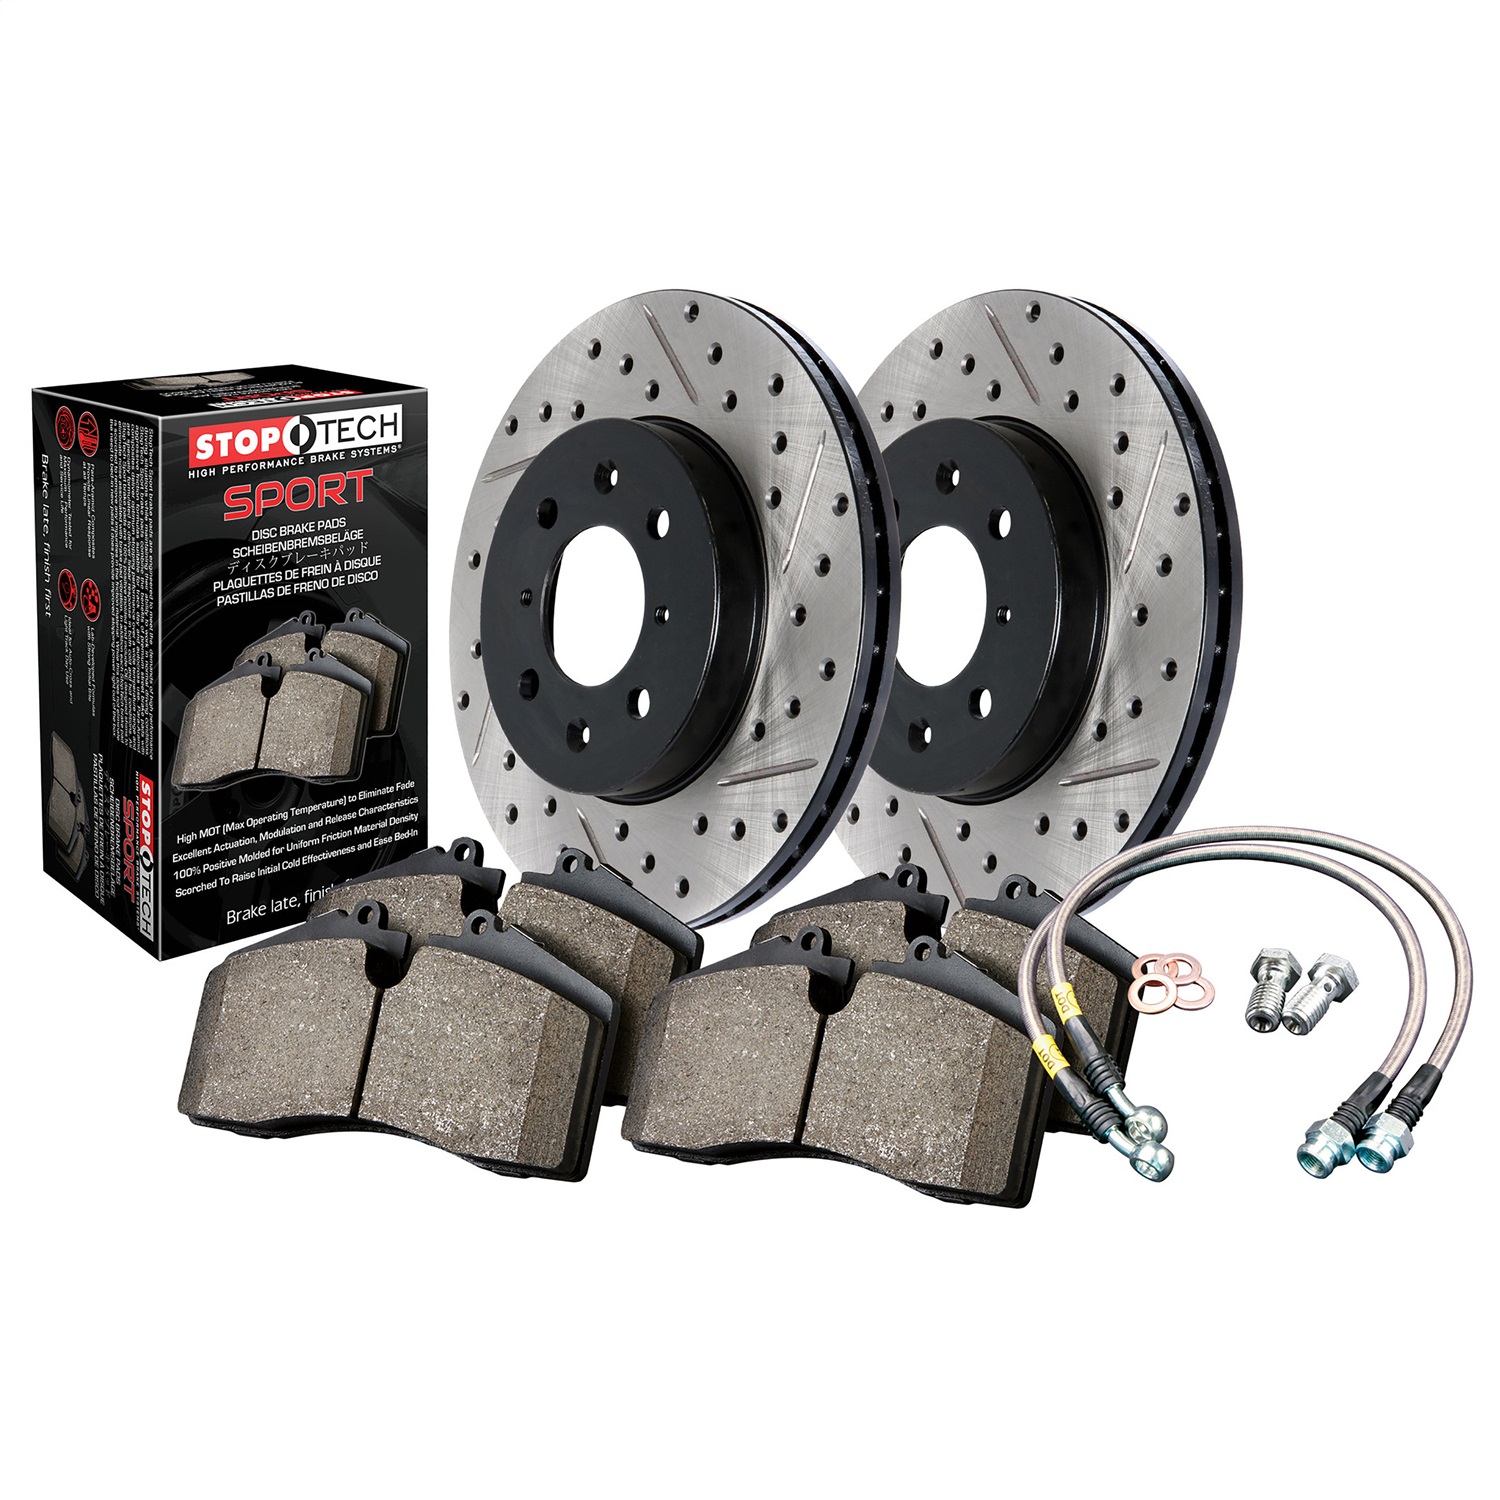 StopTech 978.39002R Sport Disc Brake Kit w/Cross-Drilled And Slotted Rotors